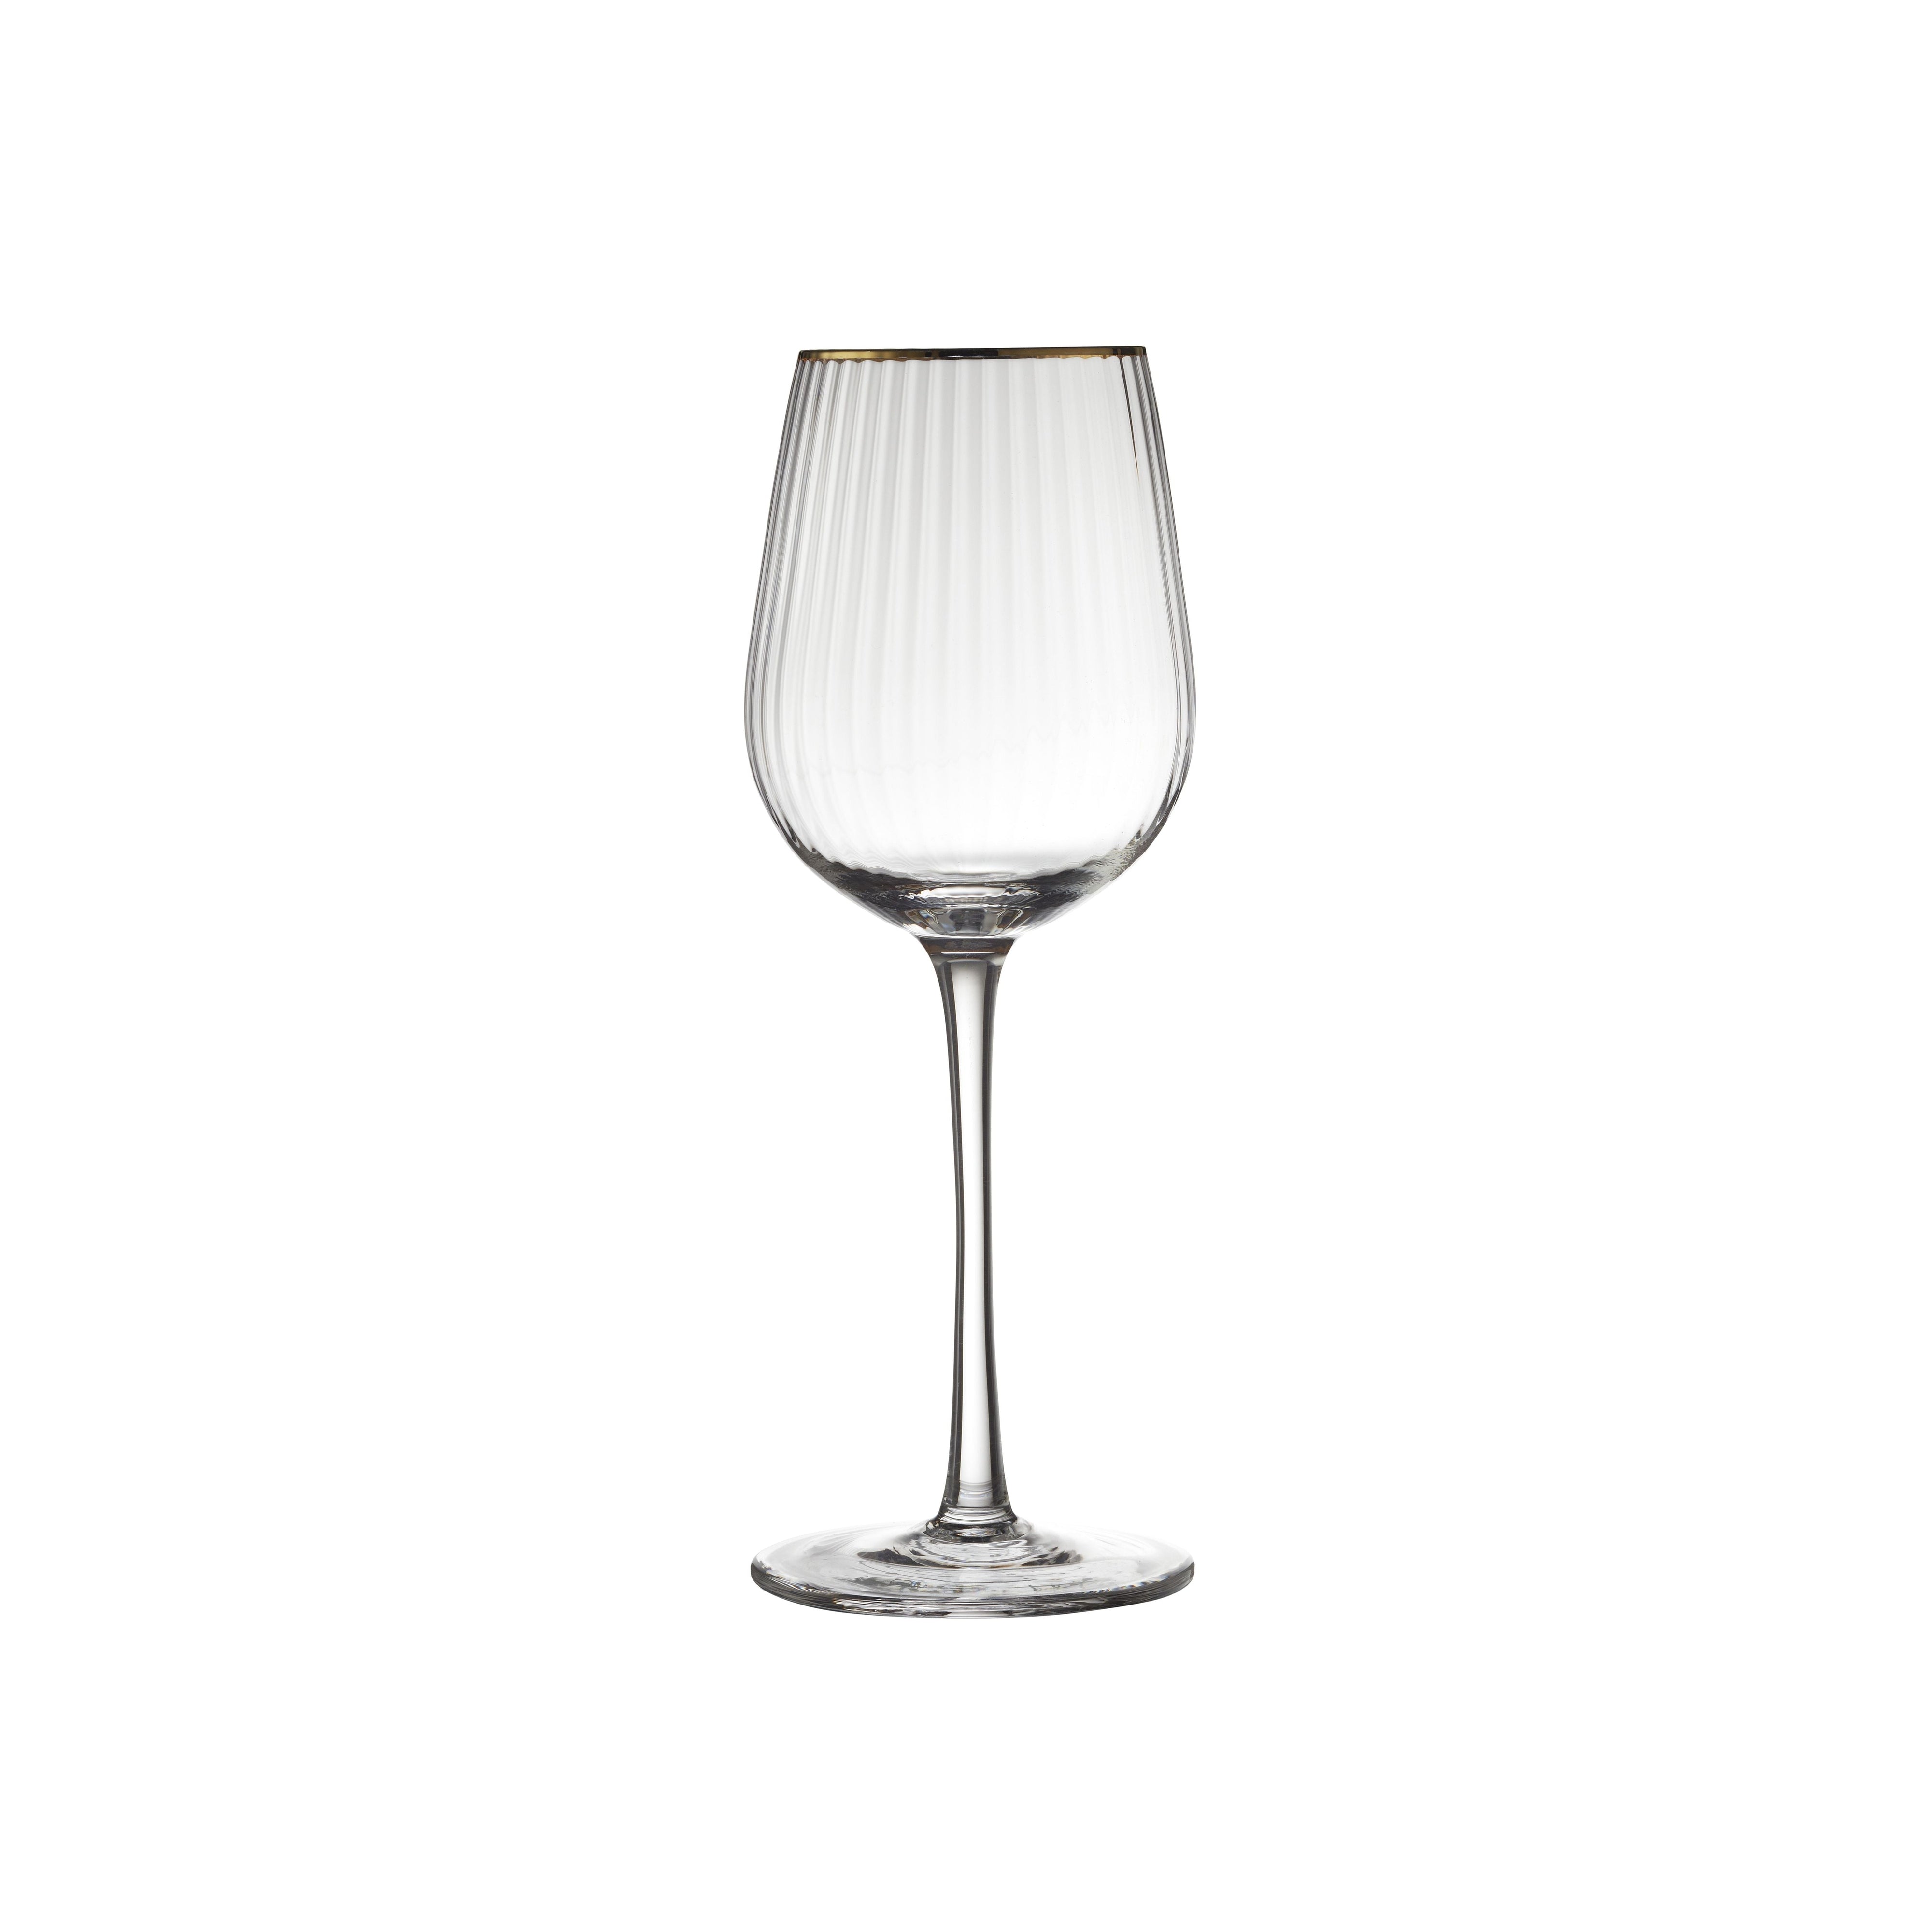 Lyngby Glas Palermo Gold White Wine Glass 30 Cl 4 st.